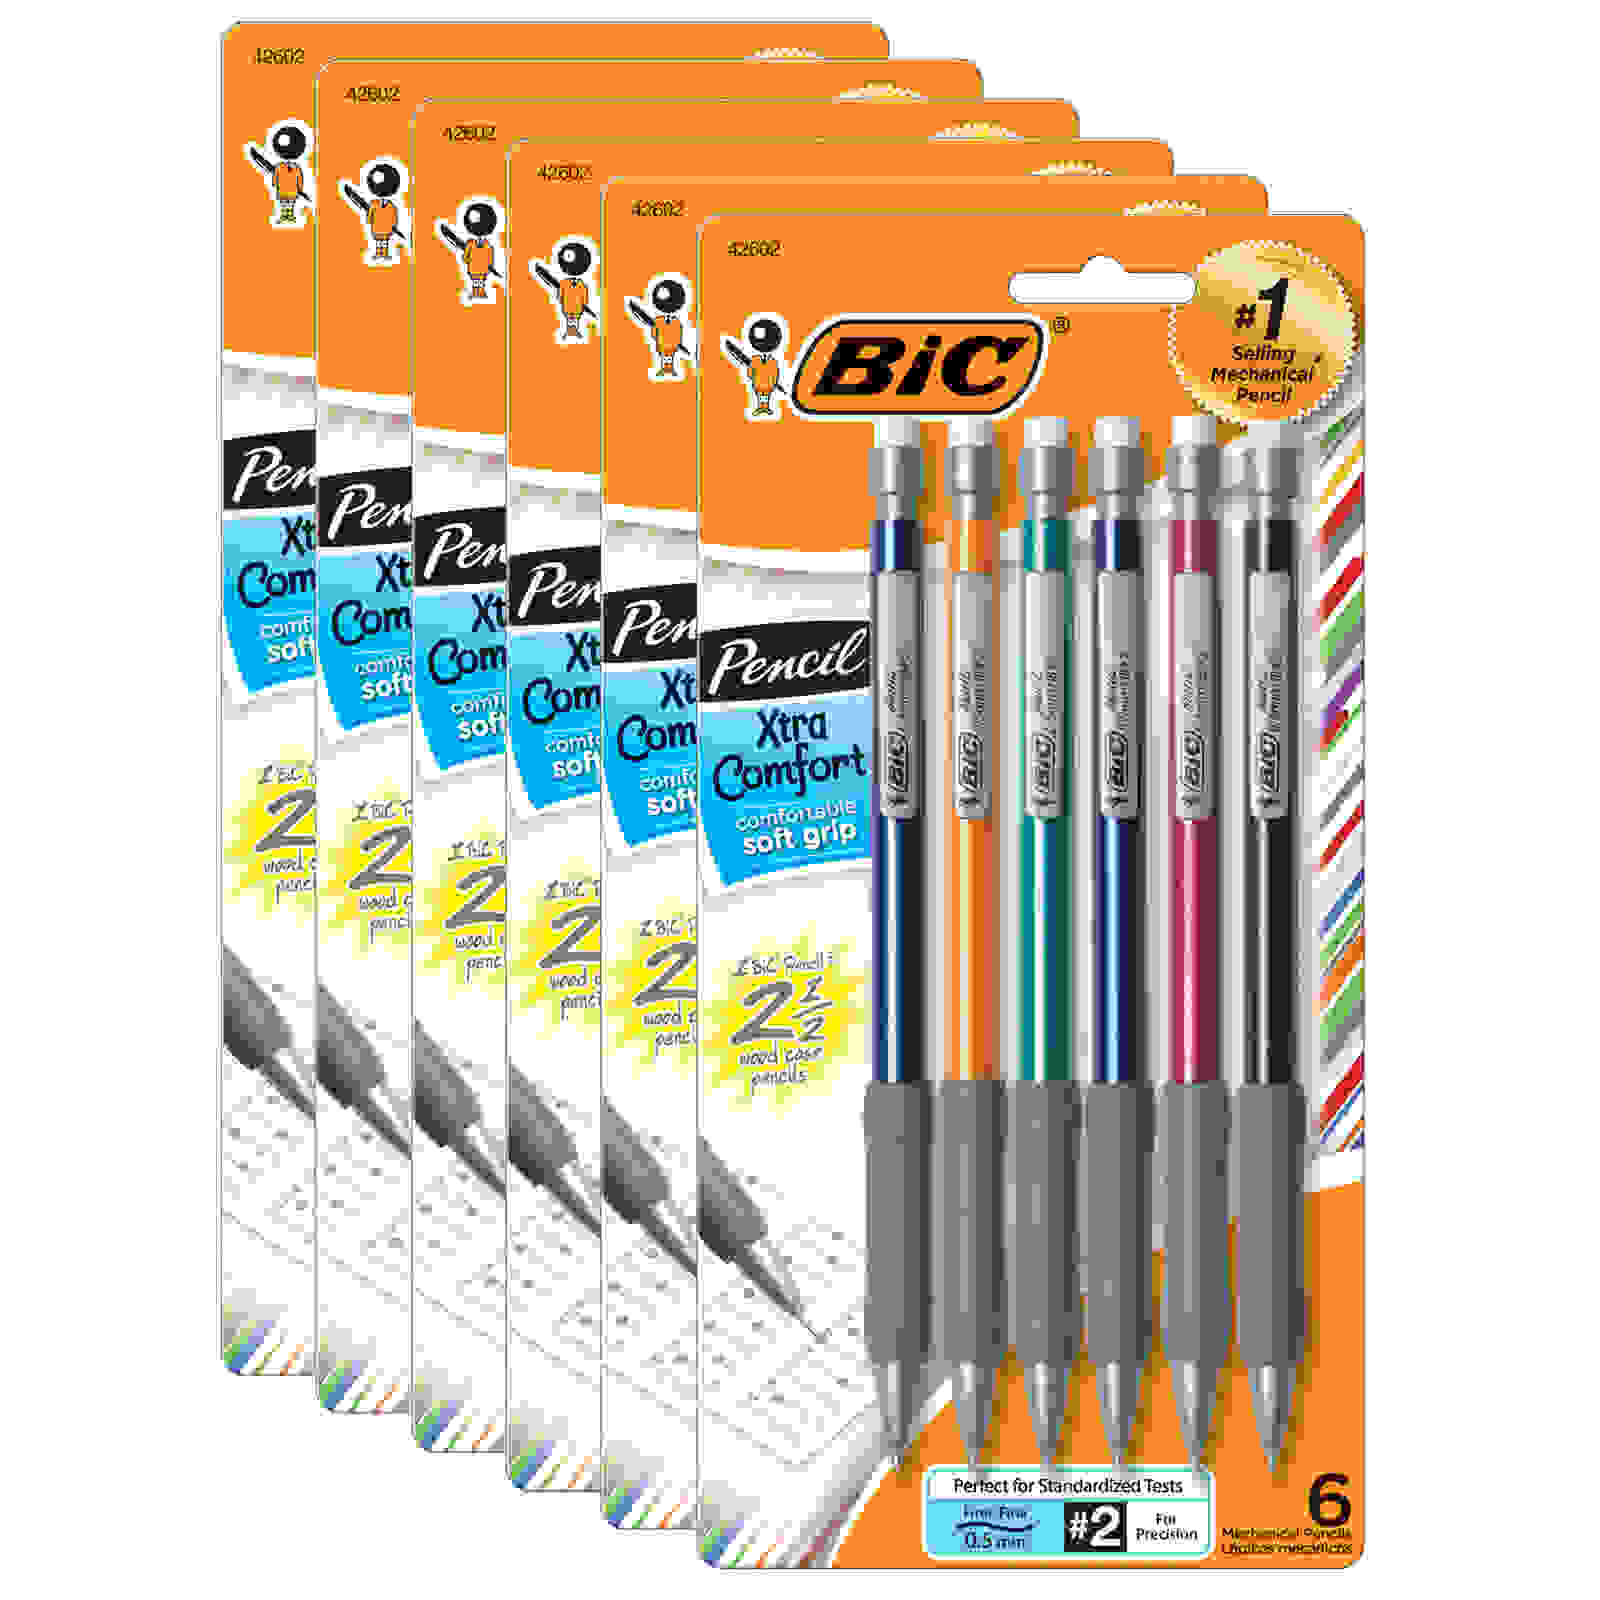 Xtra-Comfort Mechanical Pencil, 0.5mm Fine Point, 6 Per Pack, 6 Packs